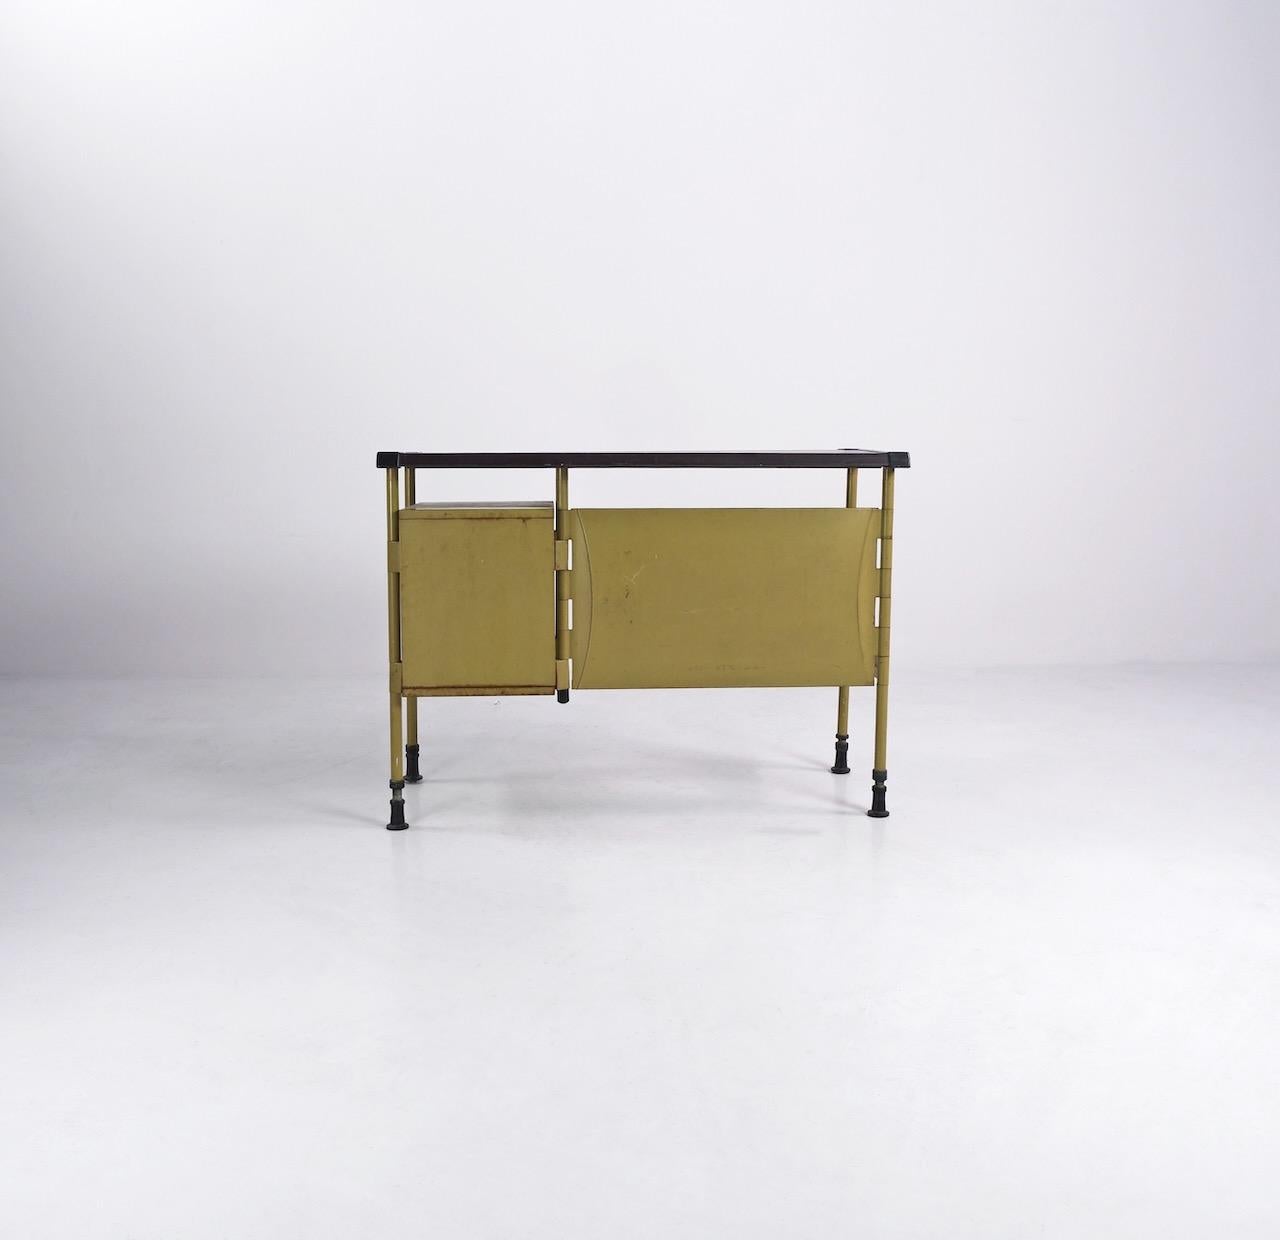 Mid-20th Century Compact Spazio Desk by BBPR Architects / Olivetti Synthesis, Italy, c.1960